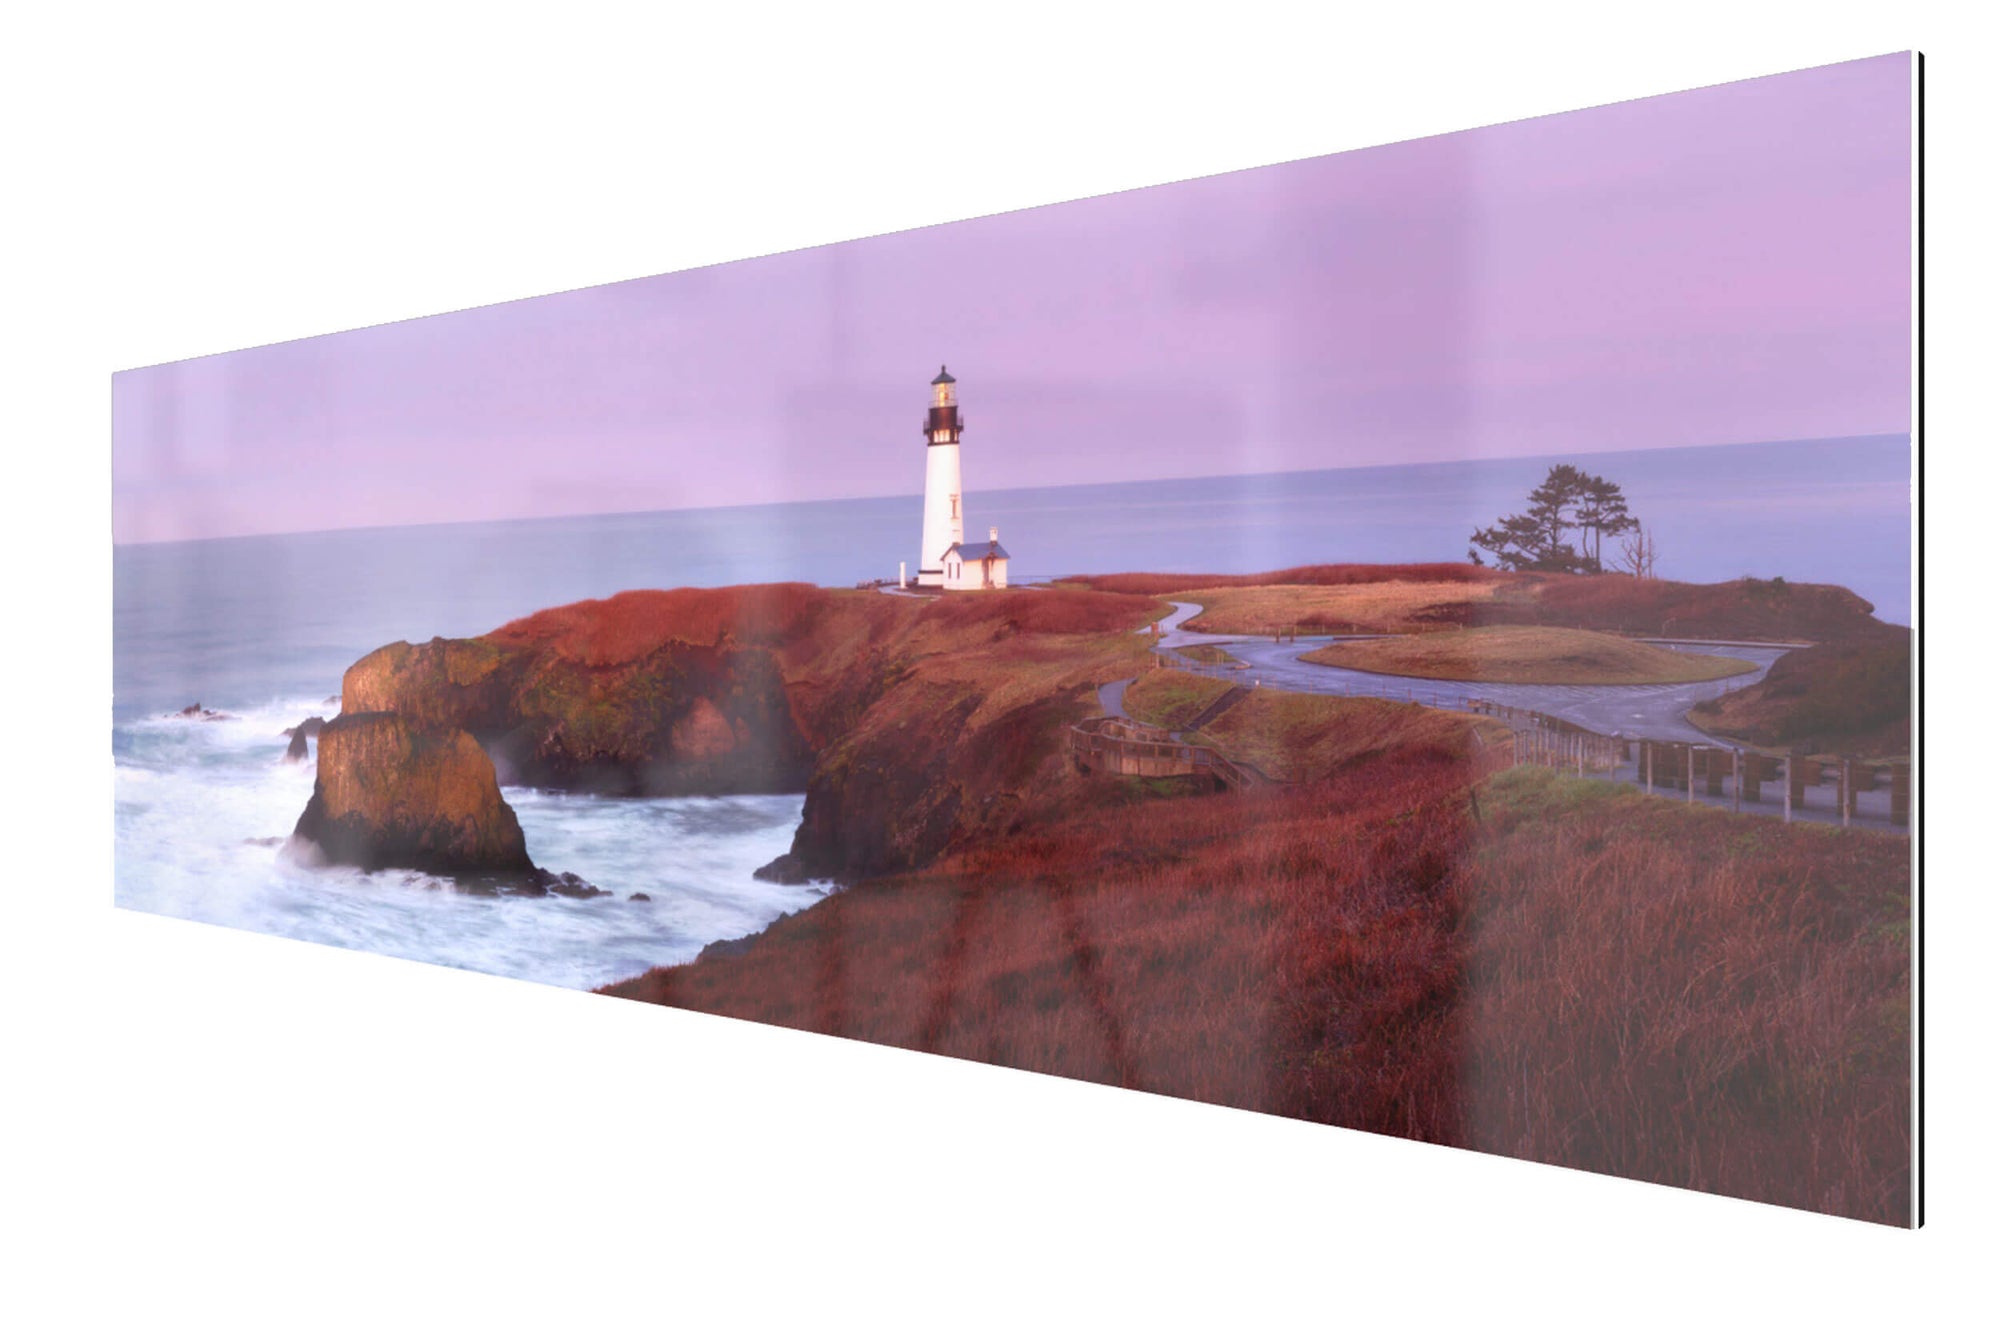 This piece of TruLife acrylic Oregon art shows the Yaquina Head Lighthouse in Oregon.